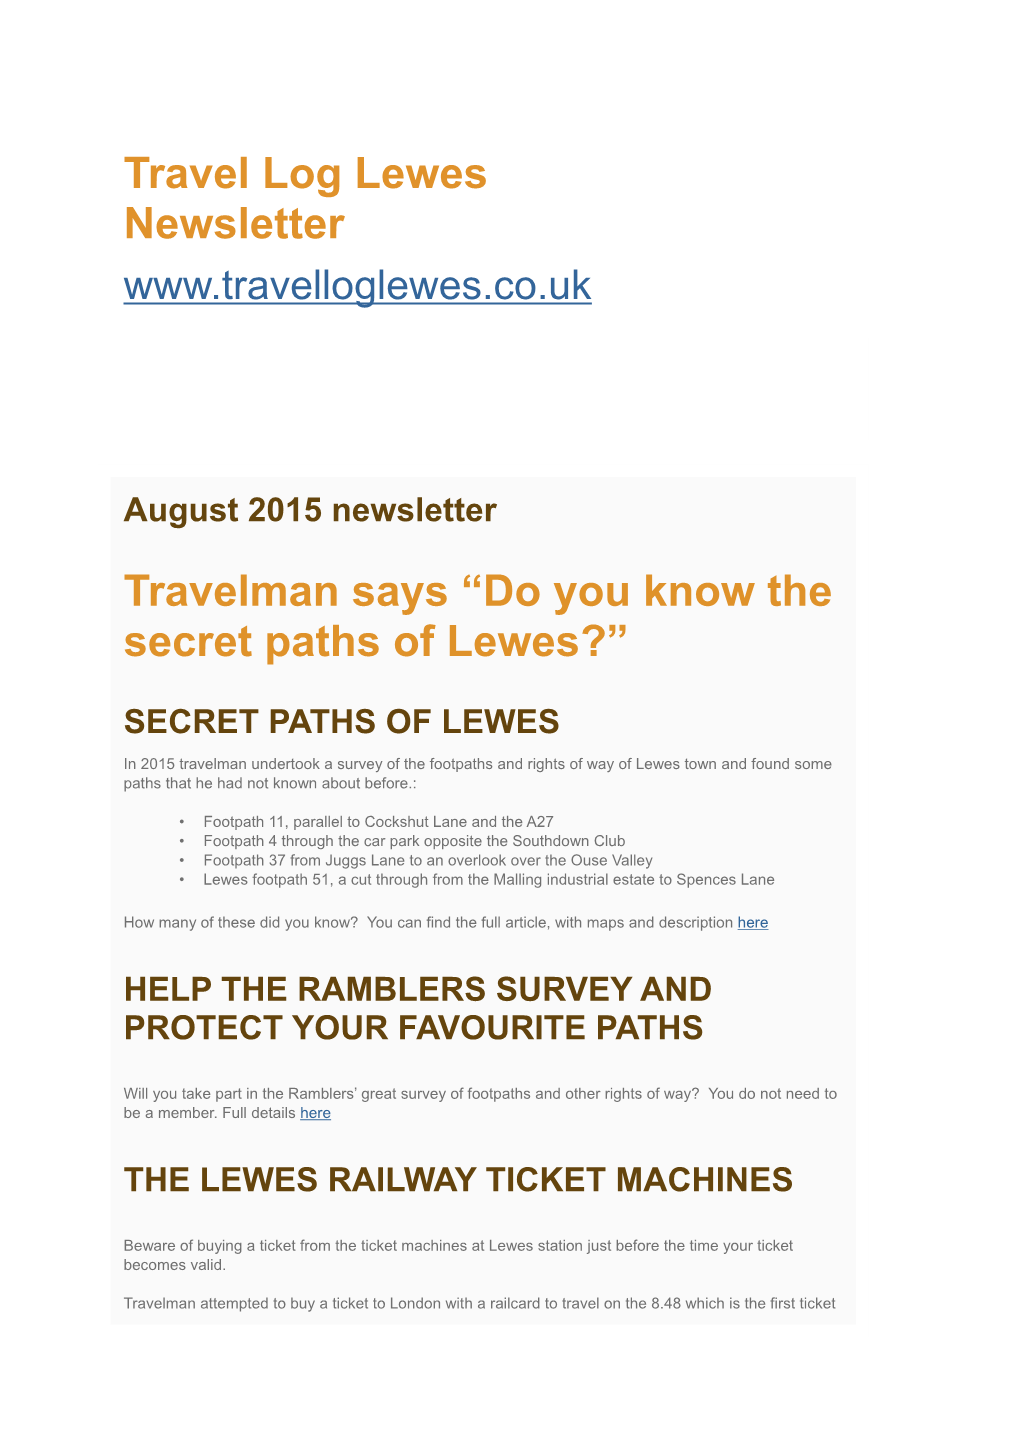 Do You Know the Secret Paths of Lewes?”